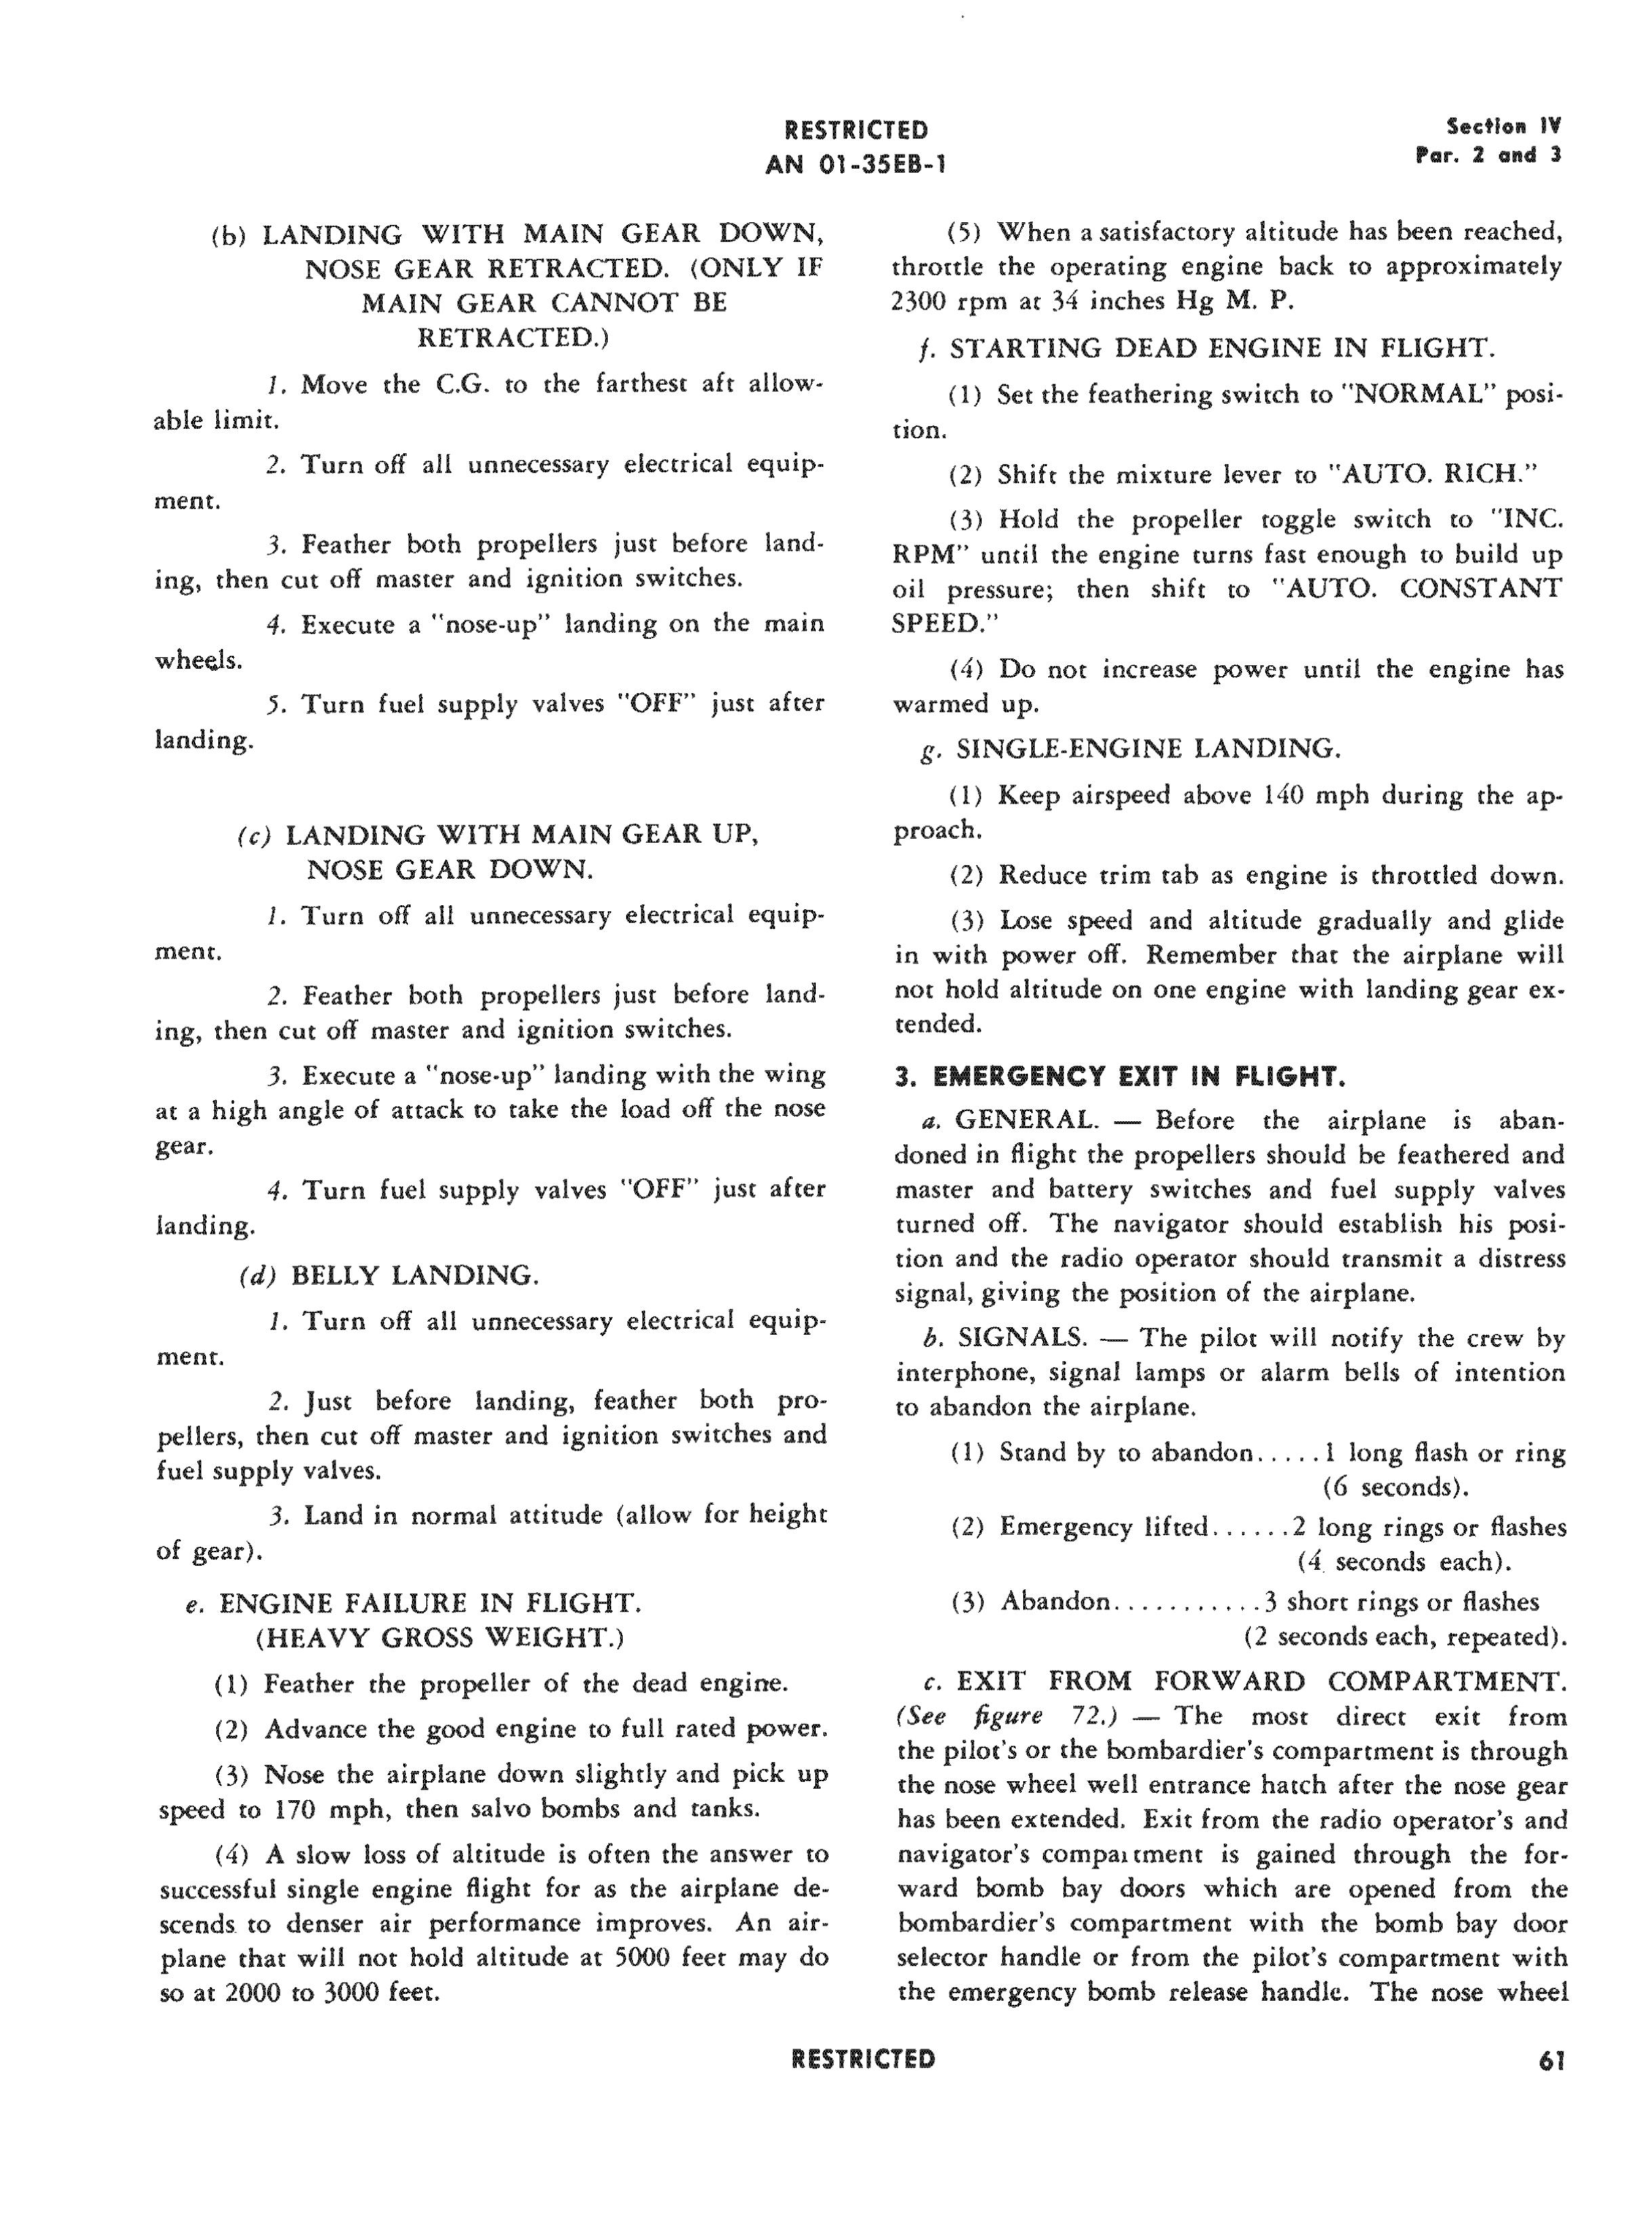 Sample page 63 from AirCorps Library document: Pilot's Flight Operating Instructions for B-26B-1 and -26C